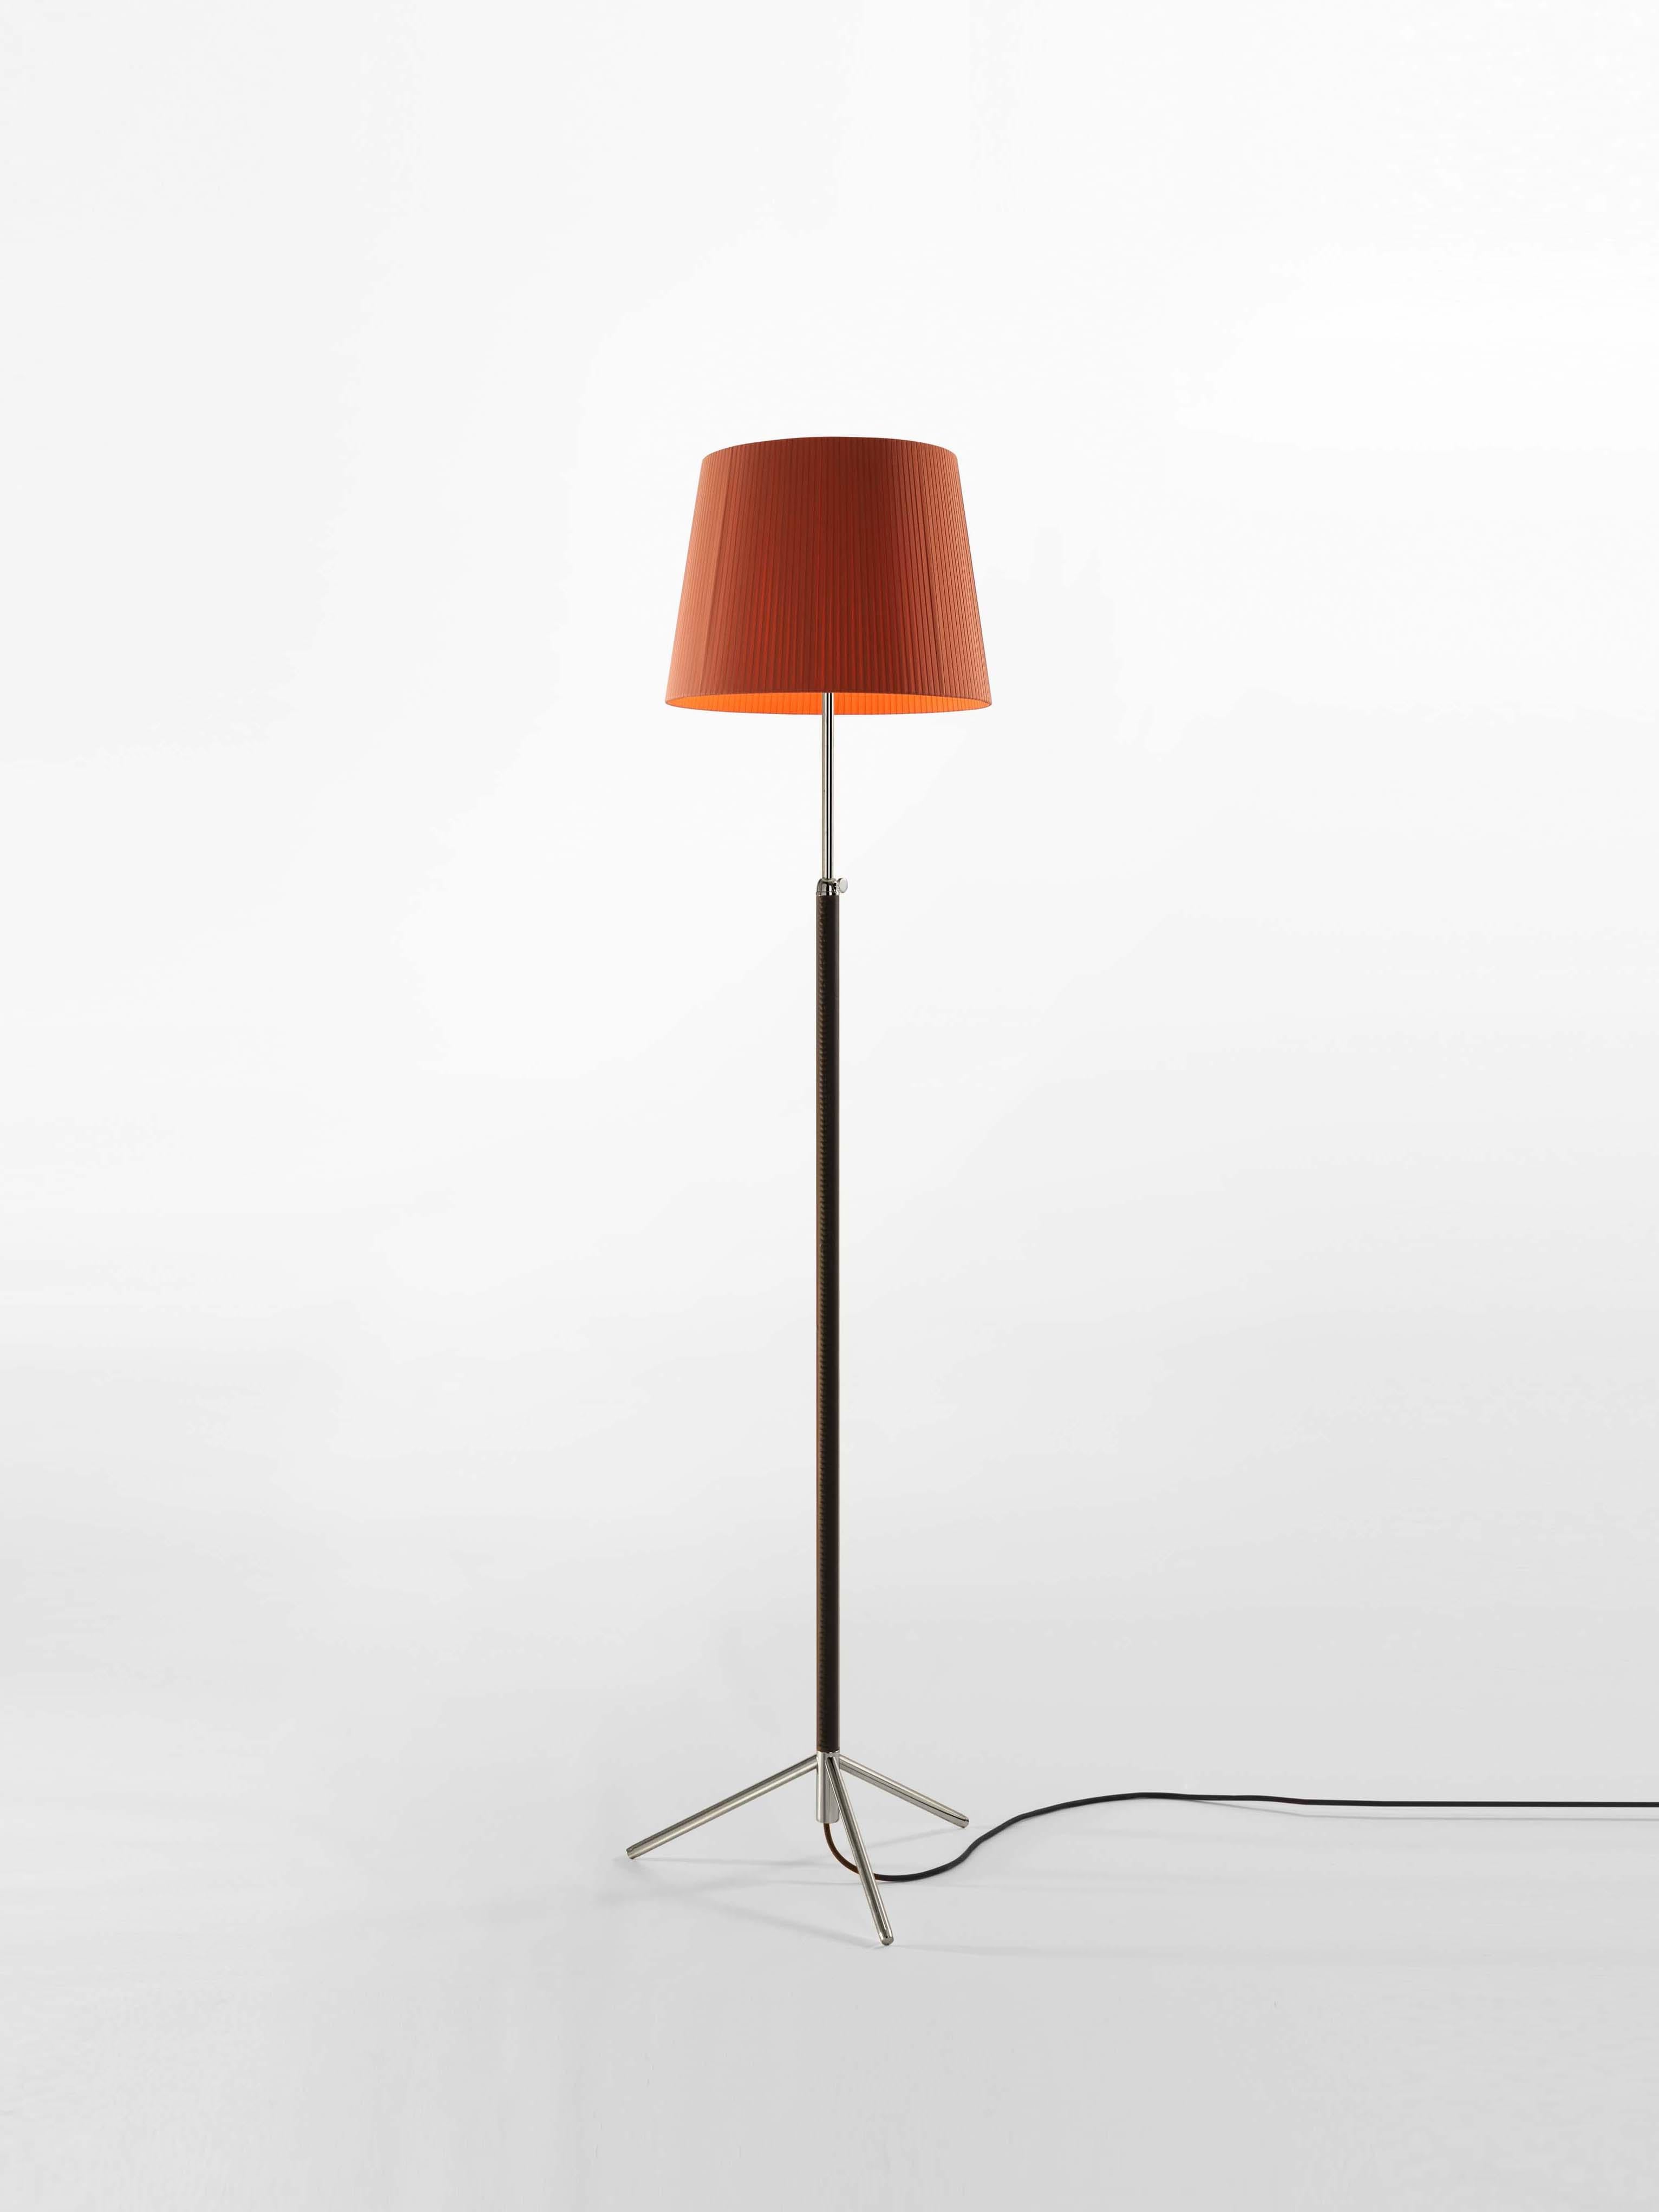 Terracotta and chrome Pie de Salón G3 floor lamp by Jaume Sans.
Dimensions: D 40 x H 120-160 cm.
Materials: Metal, leather, ribbon.
Available in chrome-plated or polished brass structure.
Available in other shade colors and sizes.

This